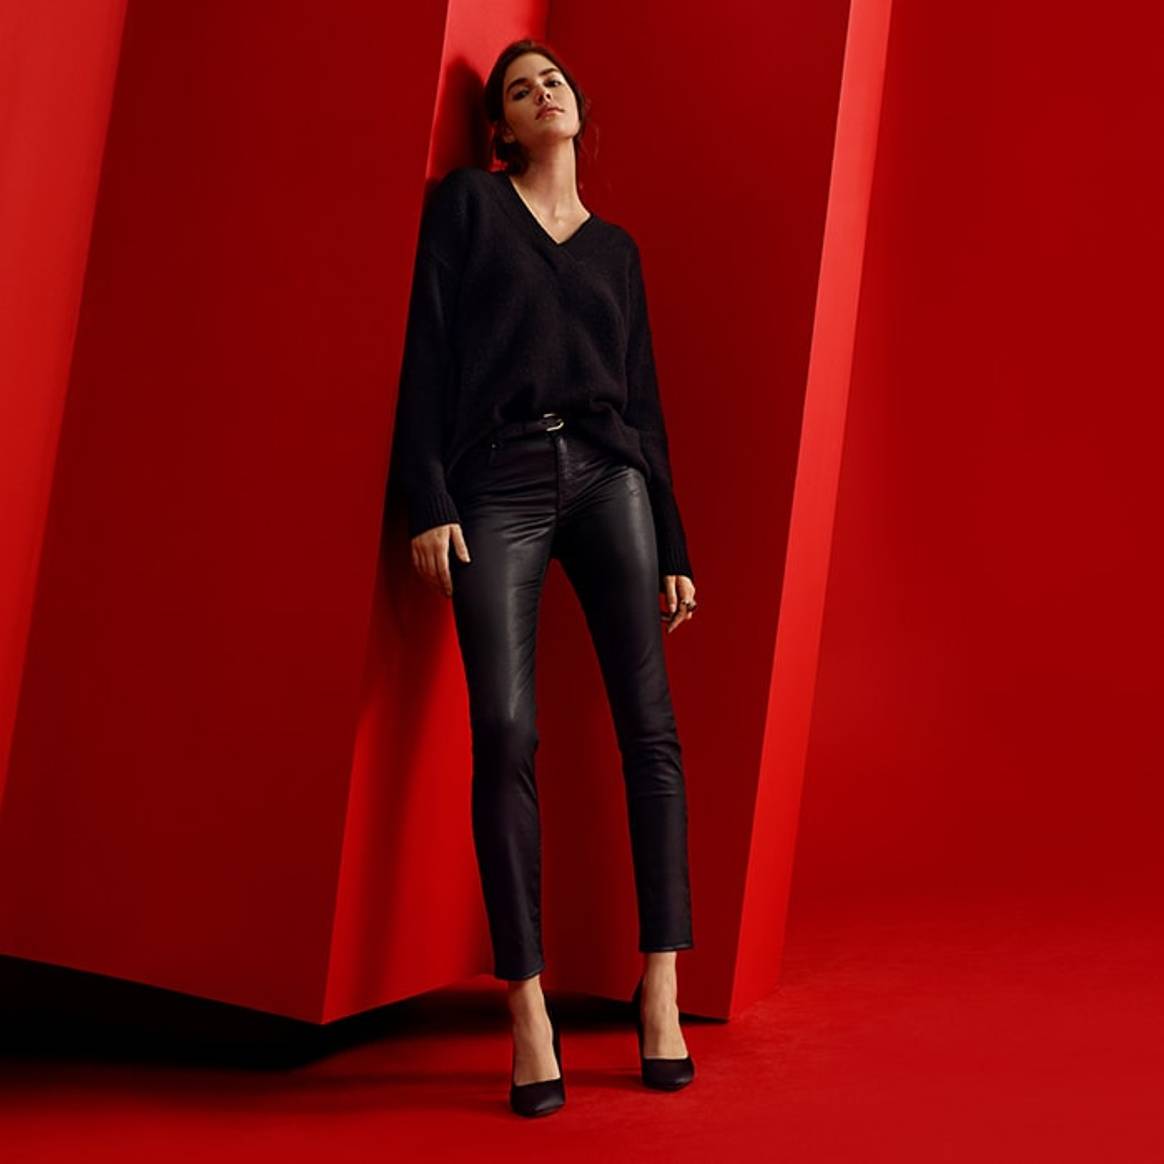 H&M US to launch debut 'All Black' collection for Black Friday